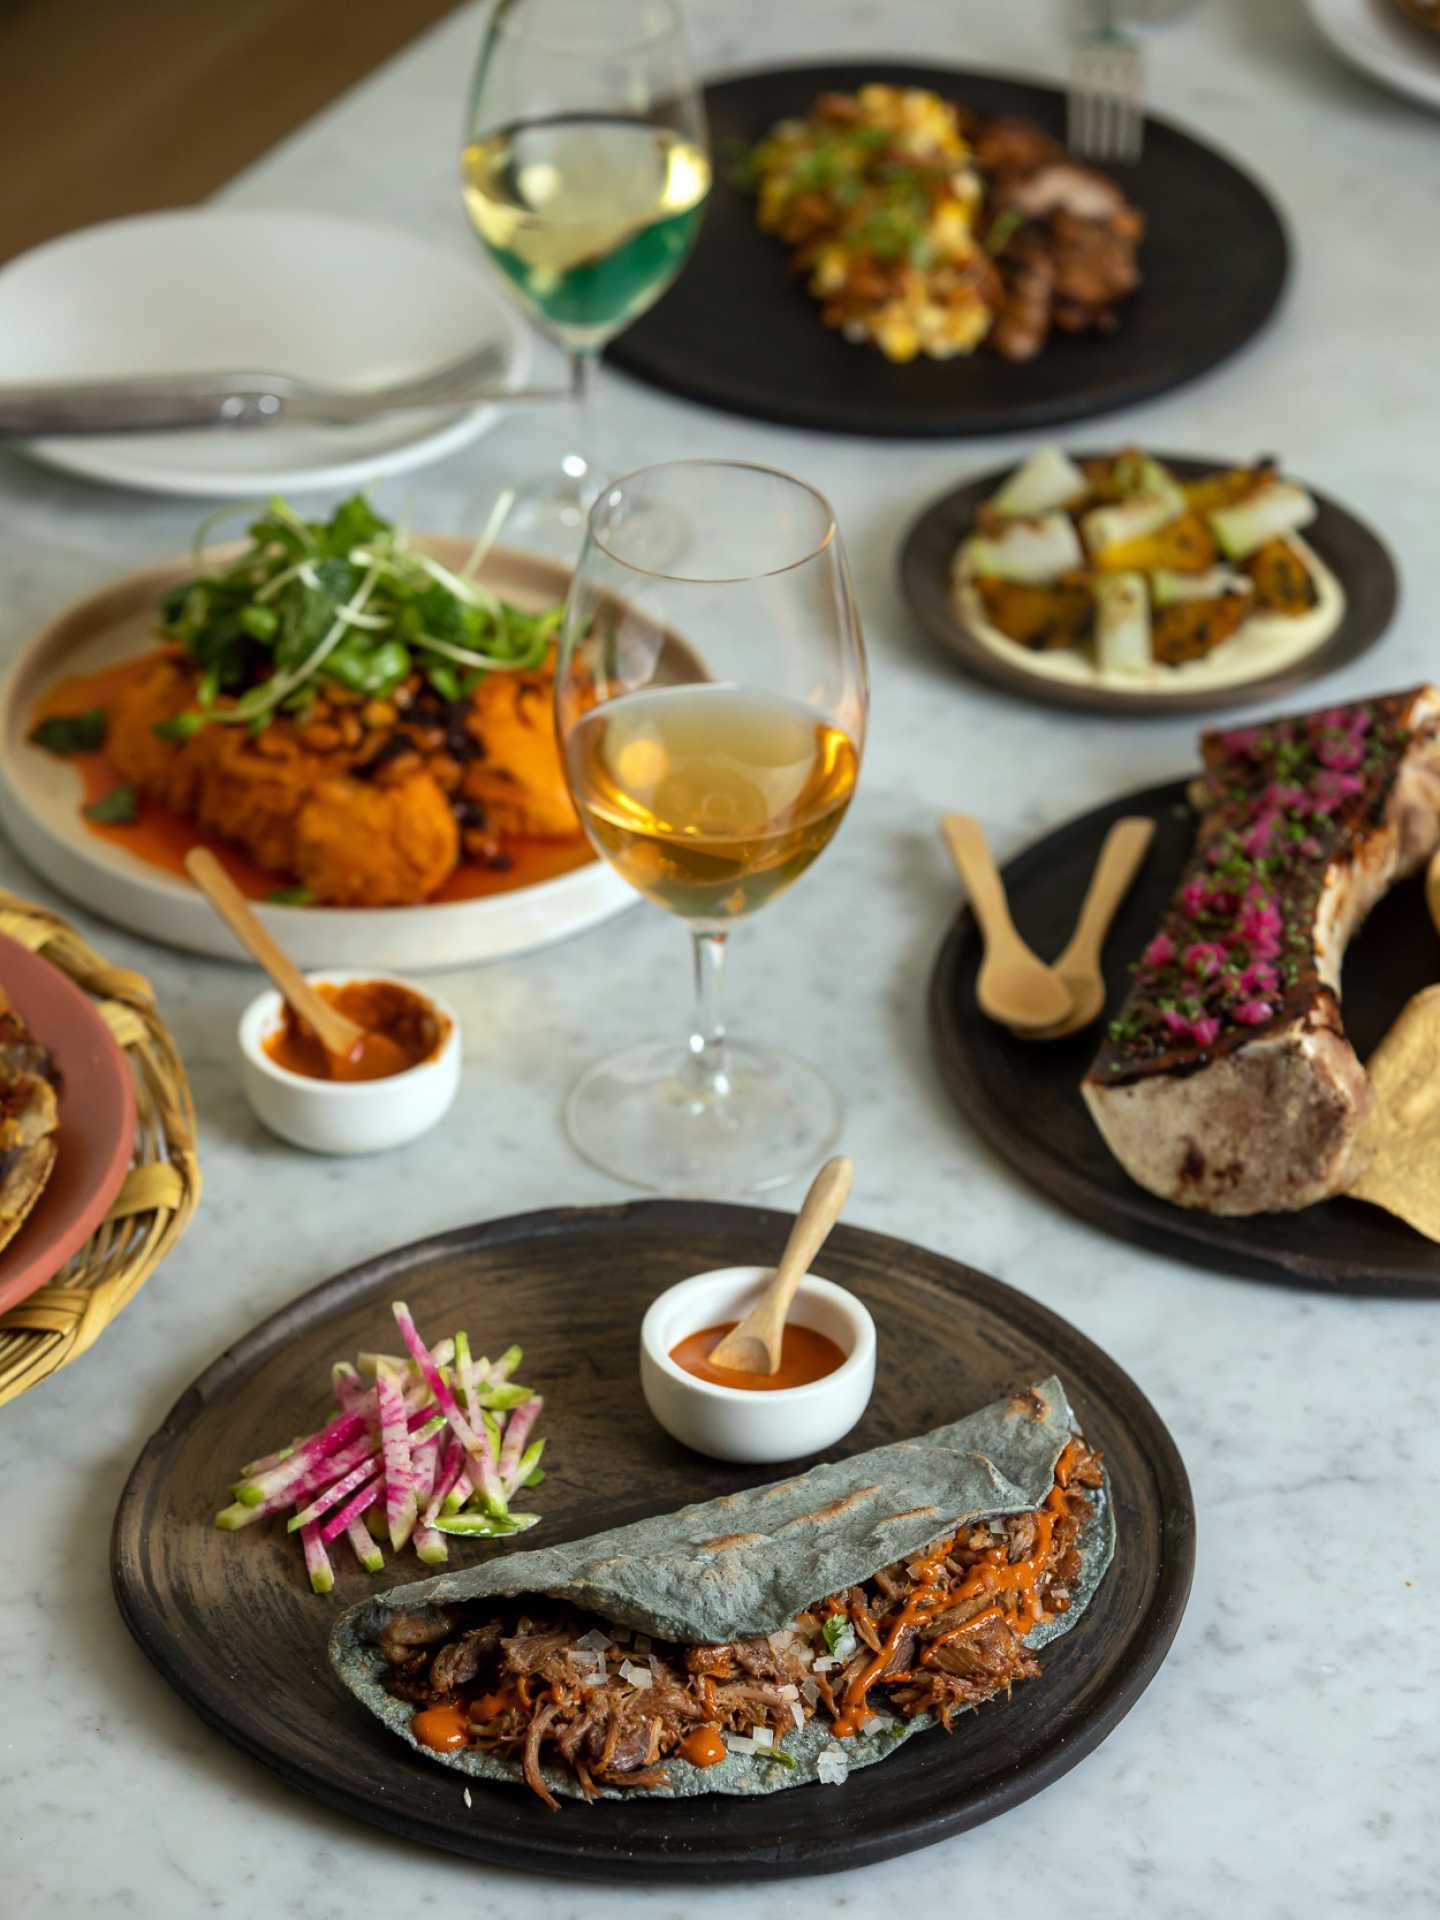 Best restaurants Toronto | A spread of dishes at Quetzal